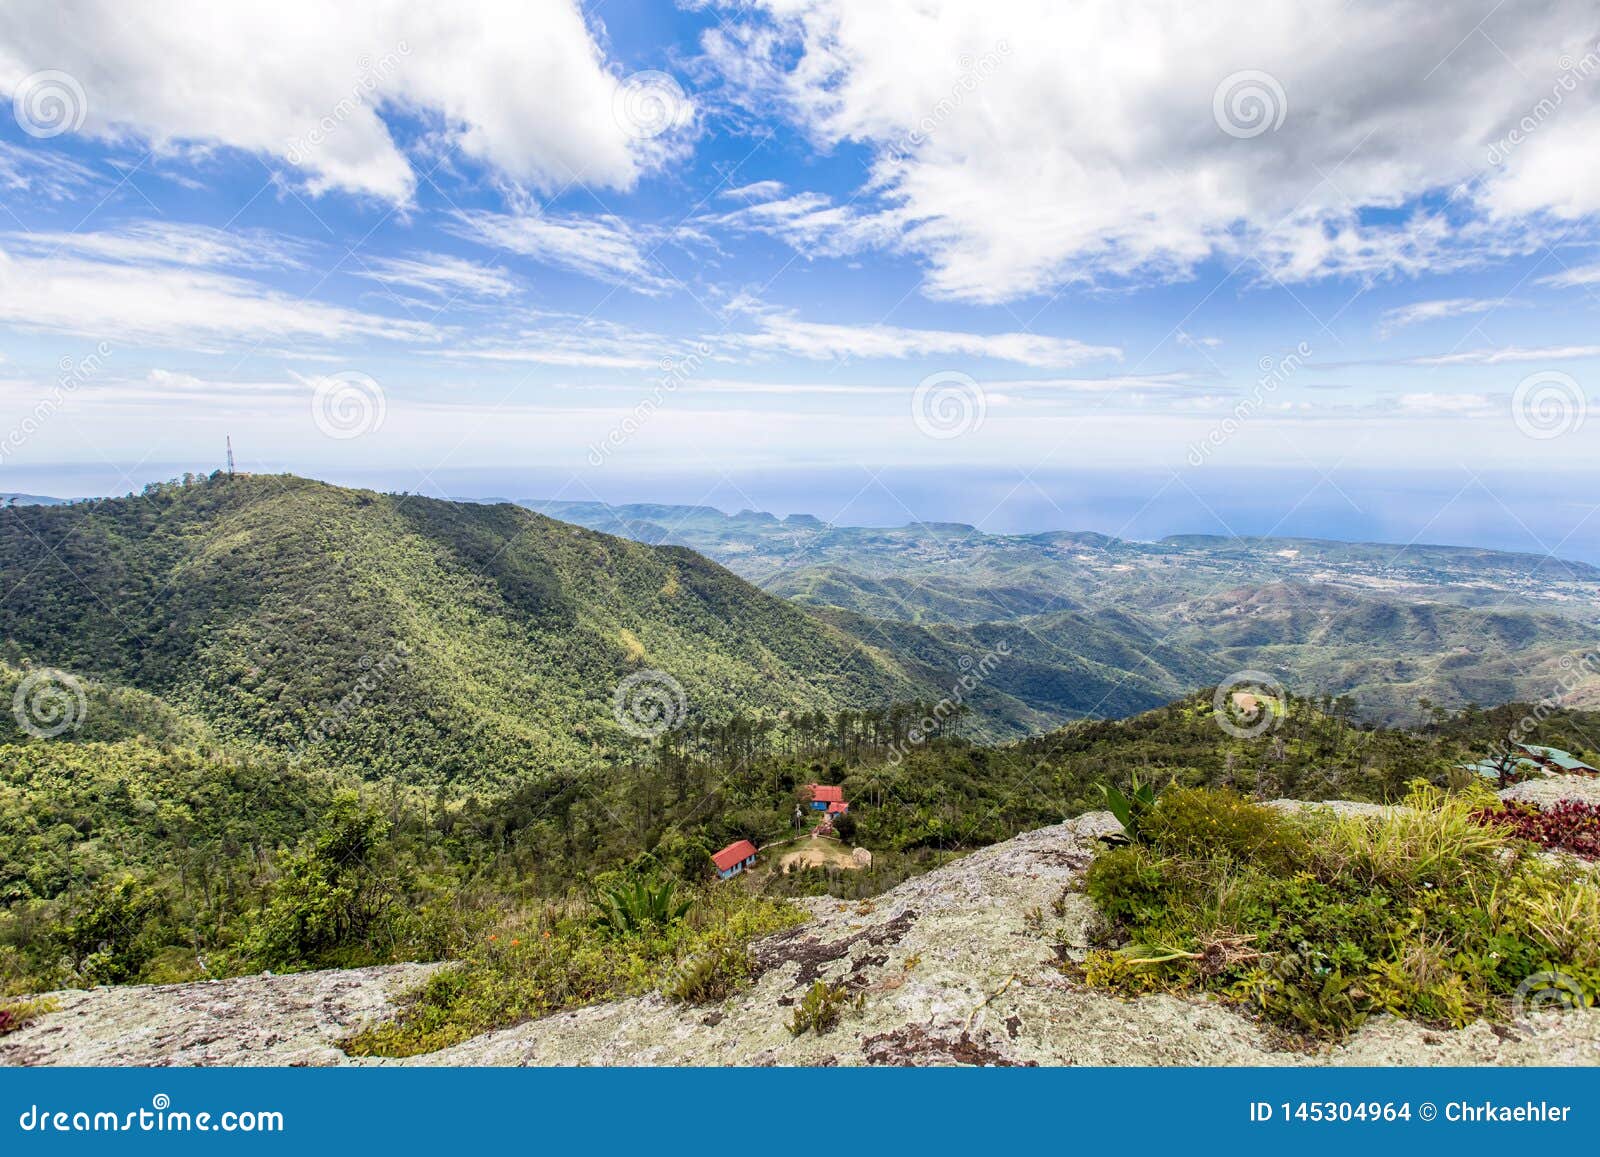 lonely house in the sierra maestra mountains in cuba